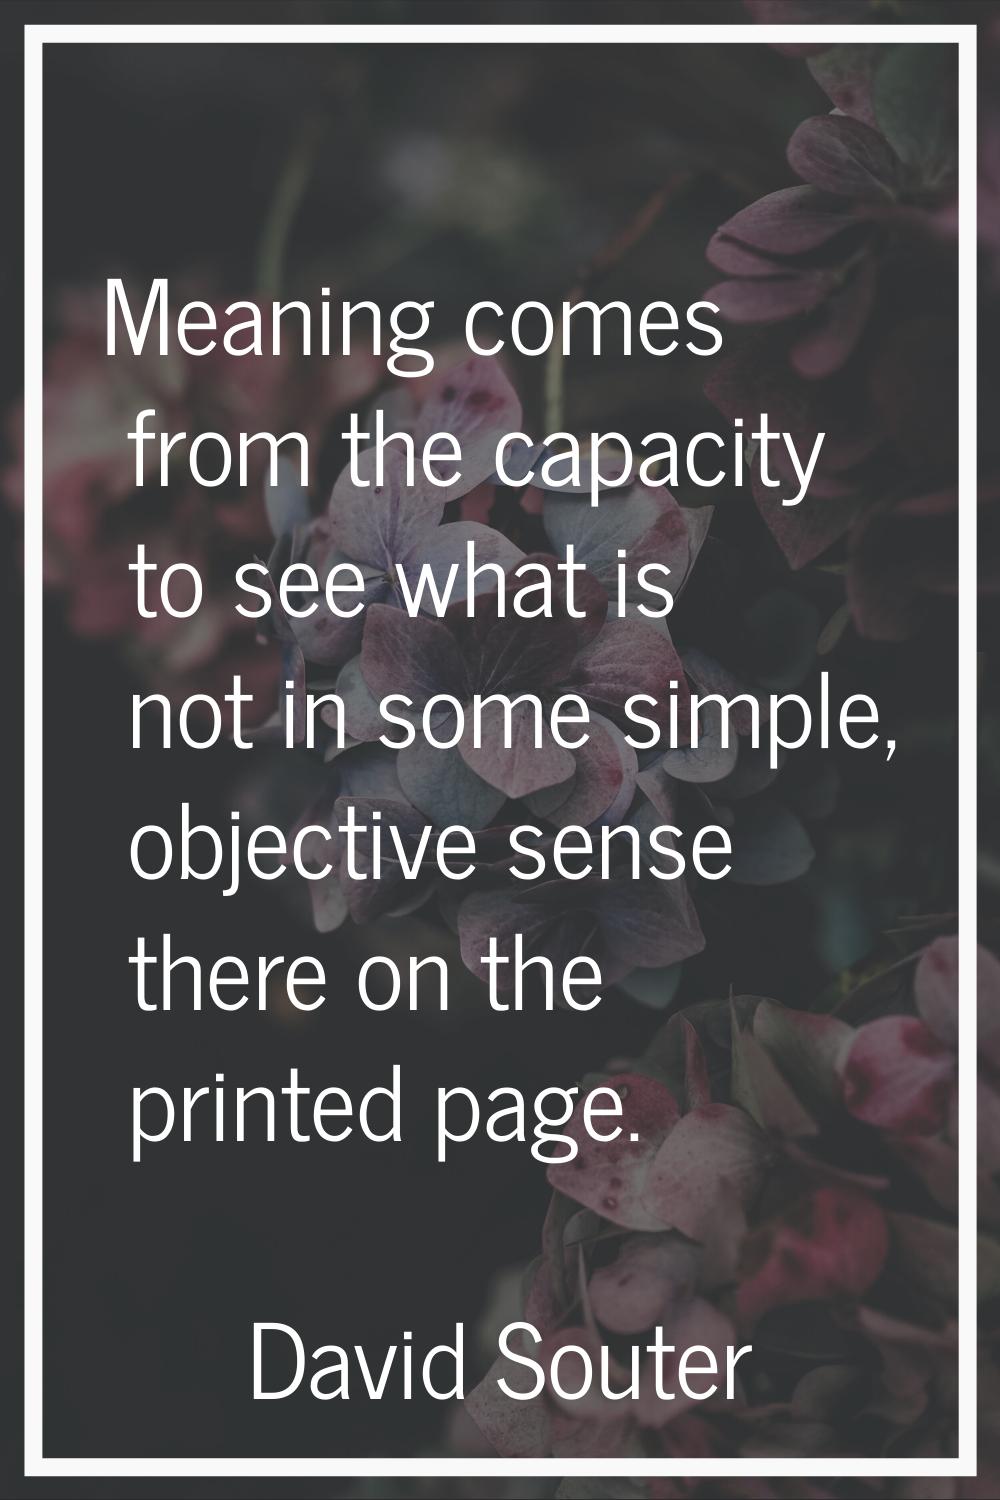 Meaning comes from the capacity to see what is not in some simple, objective sense there on the pri